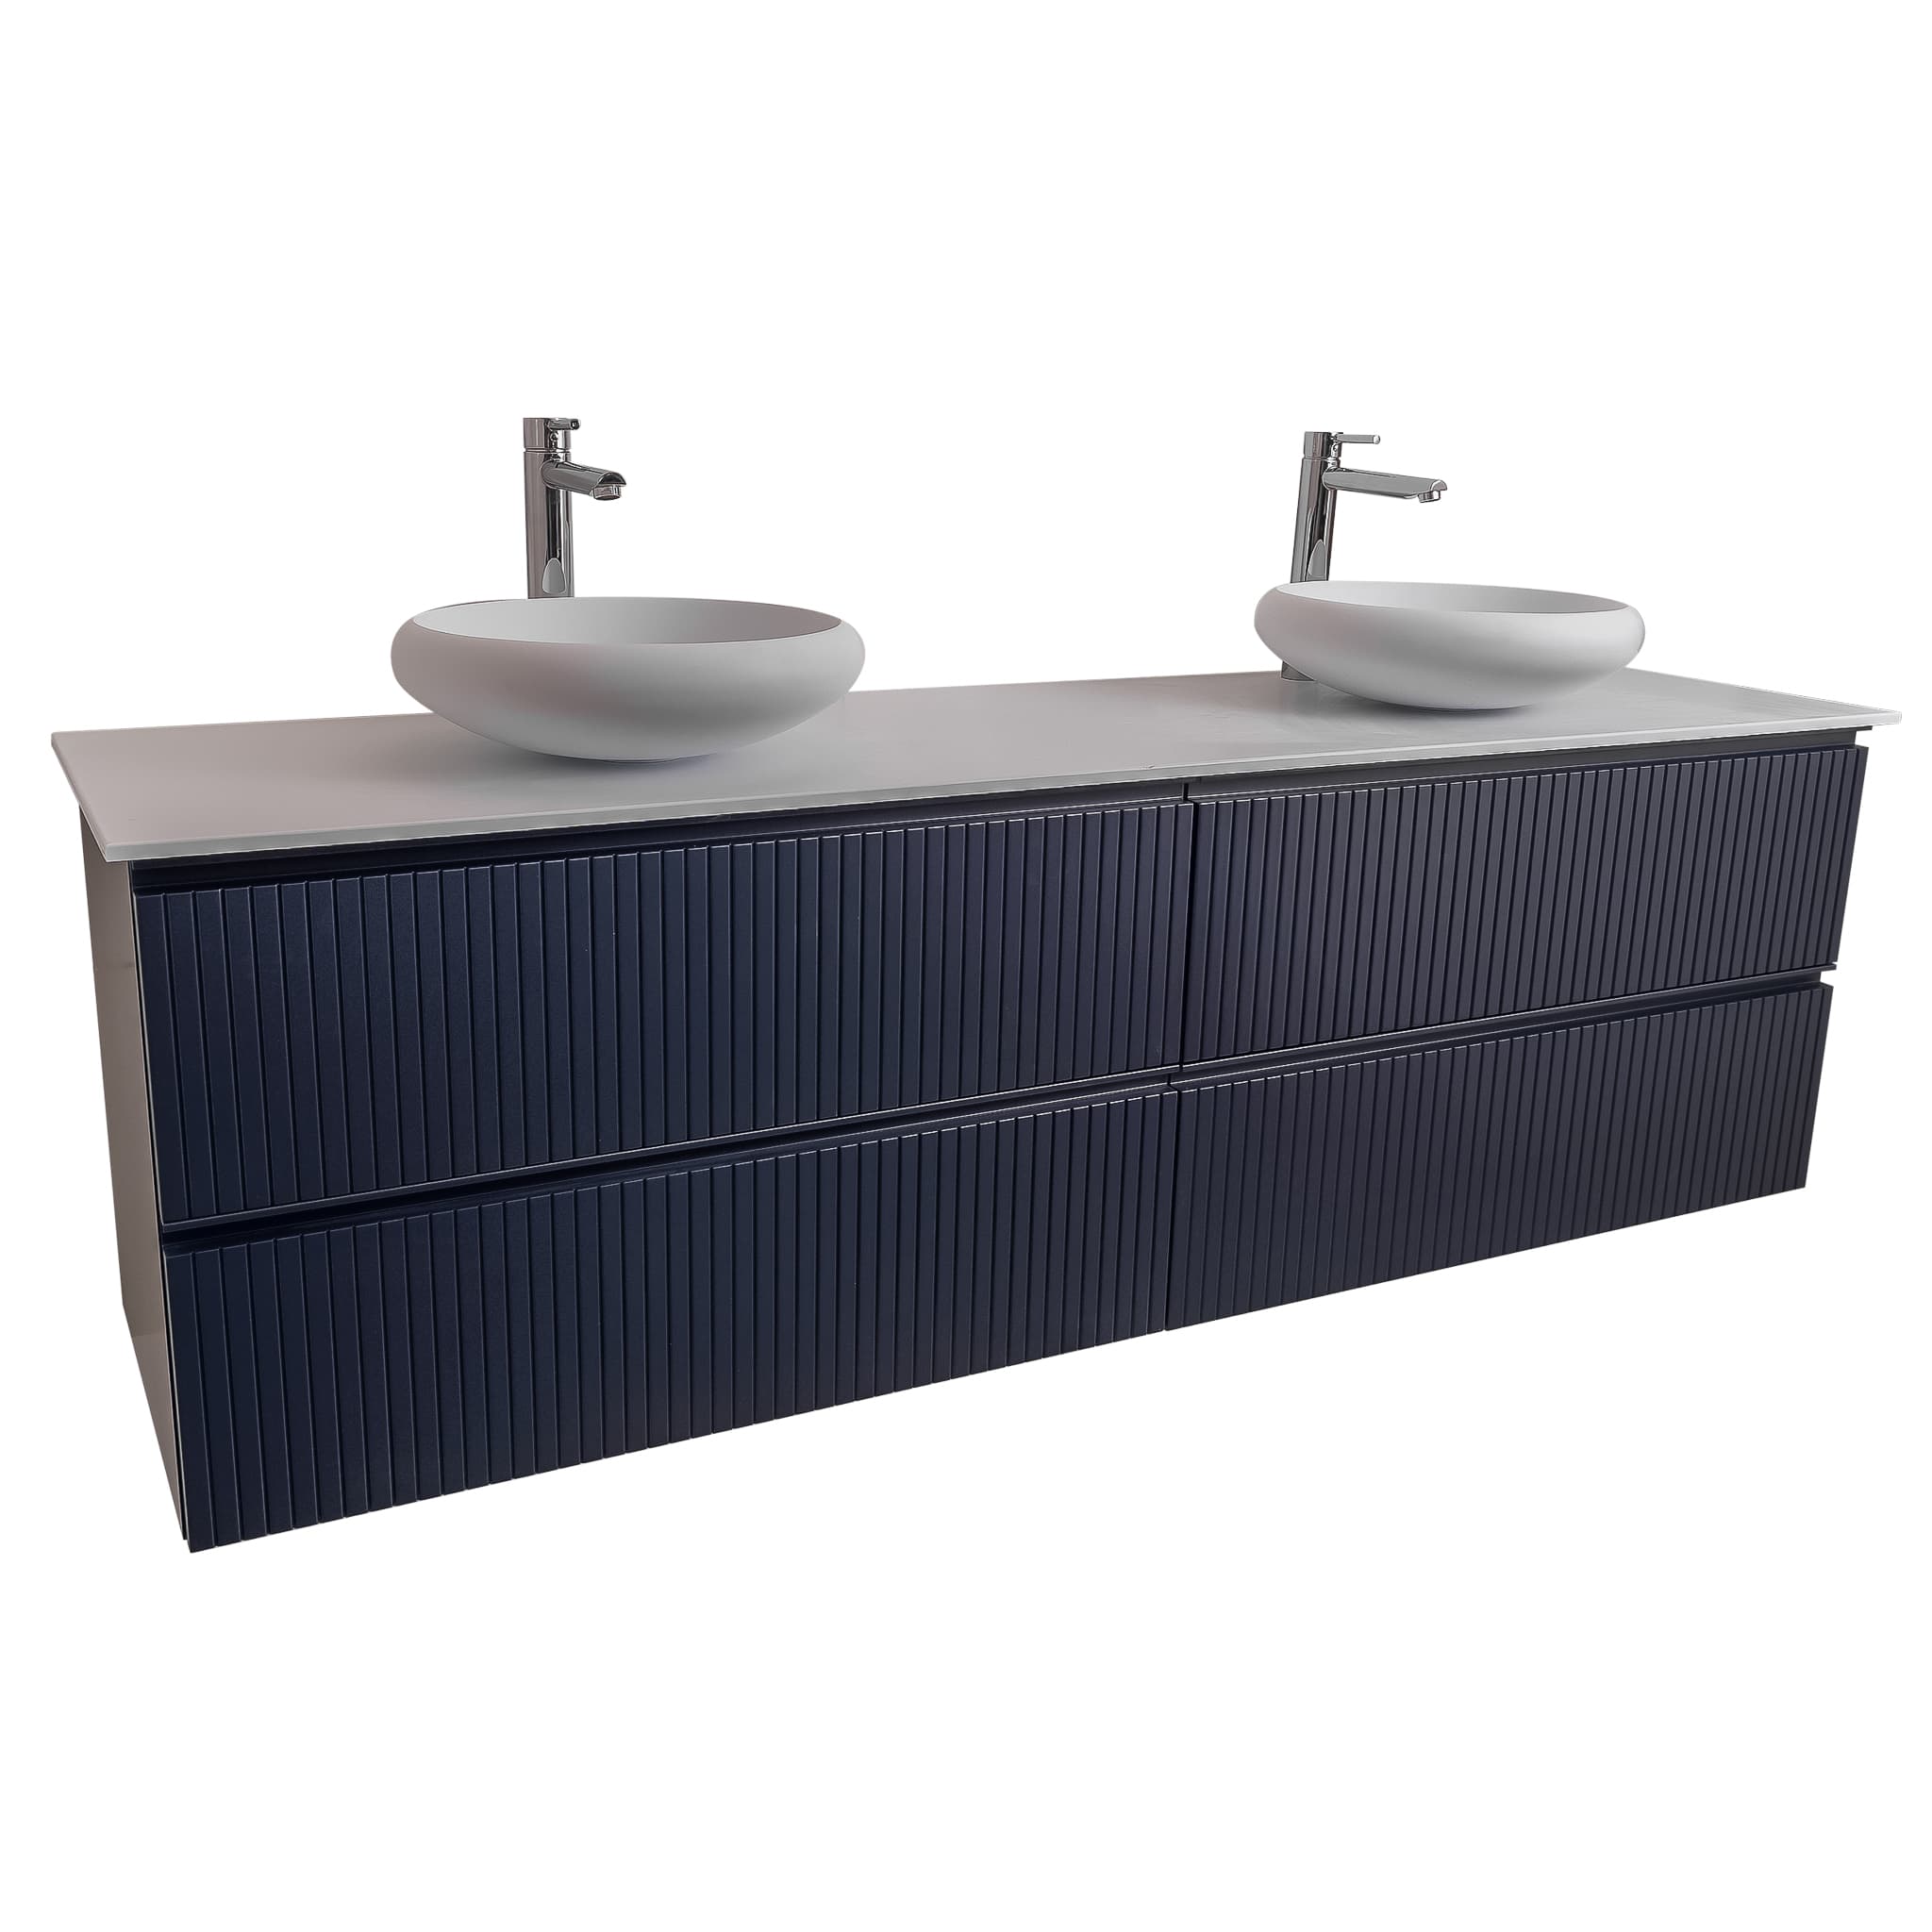 Ares 63 Matte Navy Blue Cabinet, Solid Surface Flat White Counter And Two Round Solid Surface White Basin 1153, Wall Mounted Modern Vanity Set